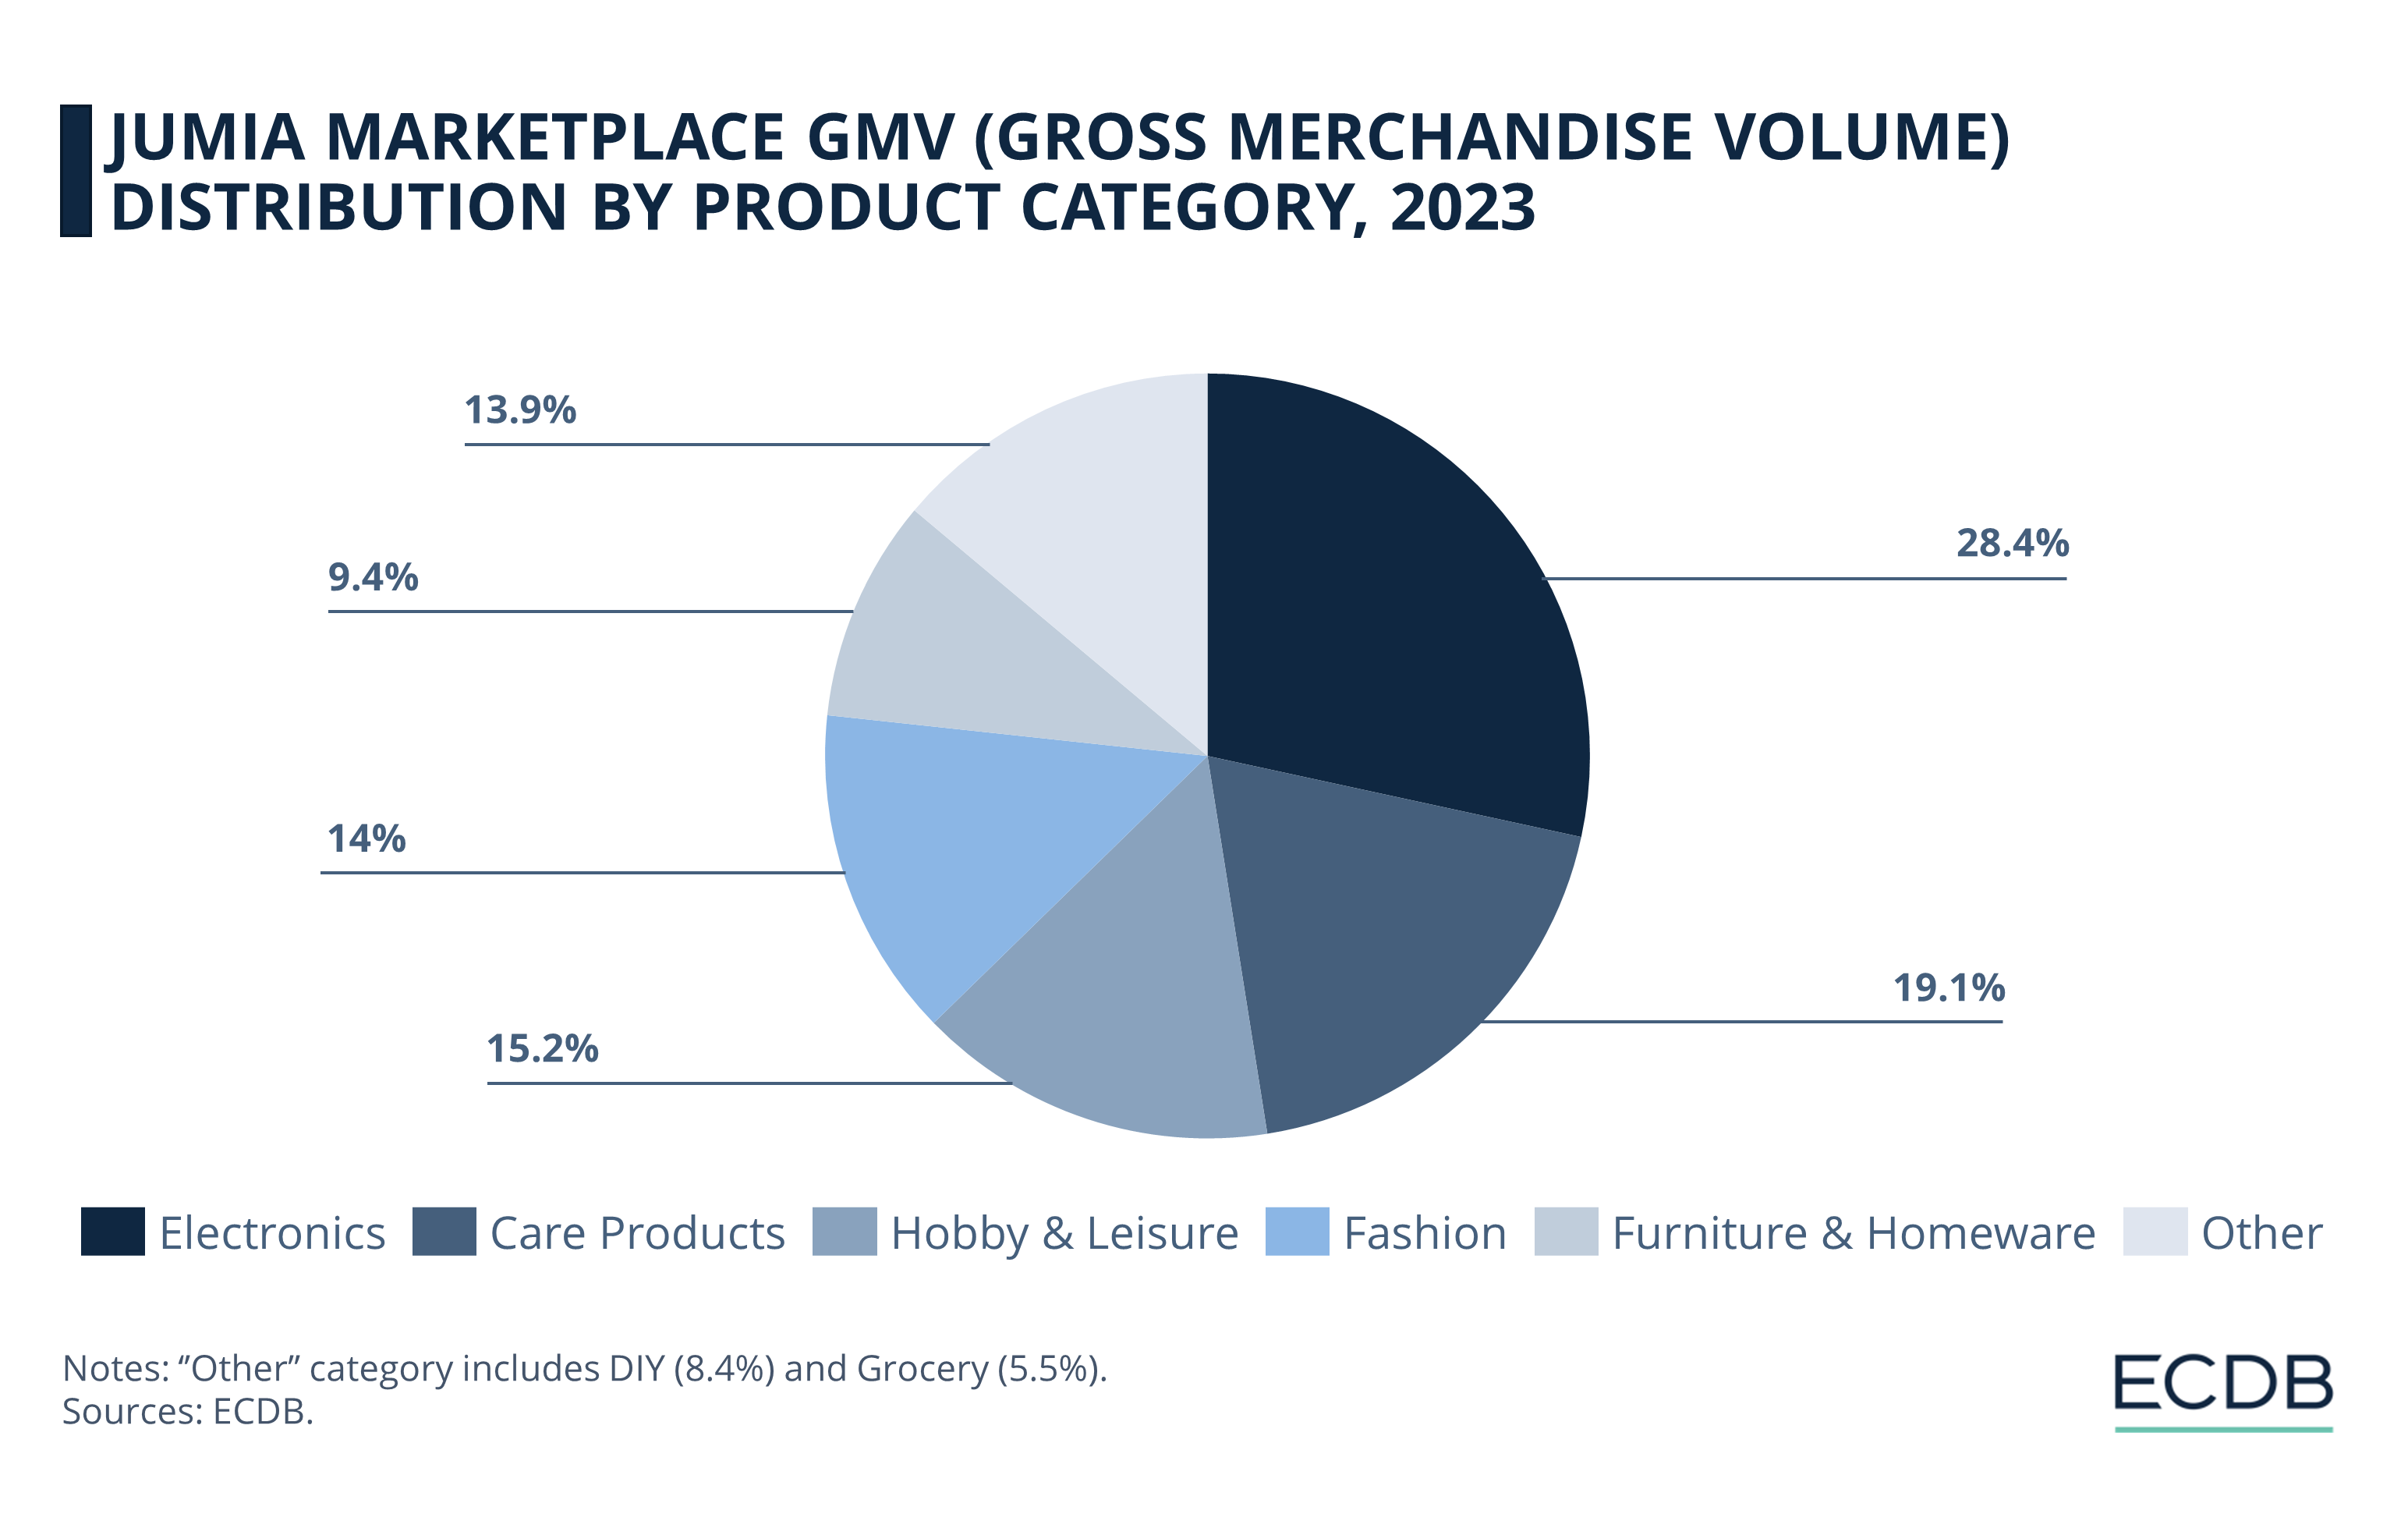 Jumia Marketplace GMV (Gross Merchandise Volume) Distribution by Product Category, 2023